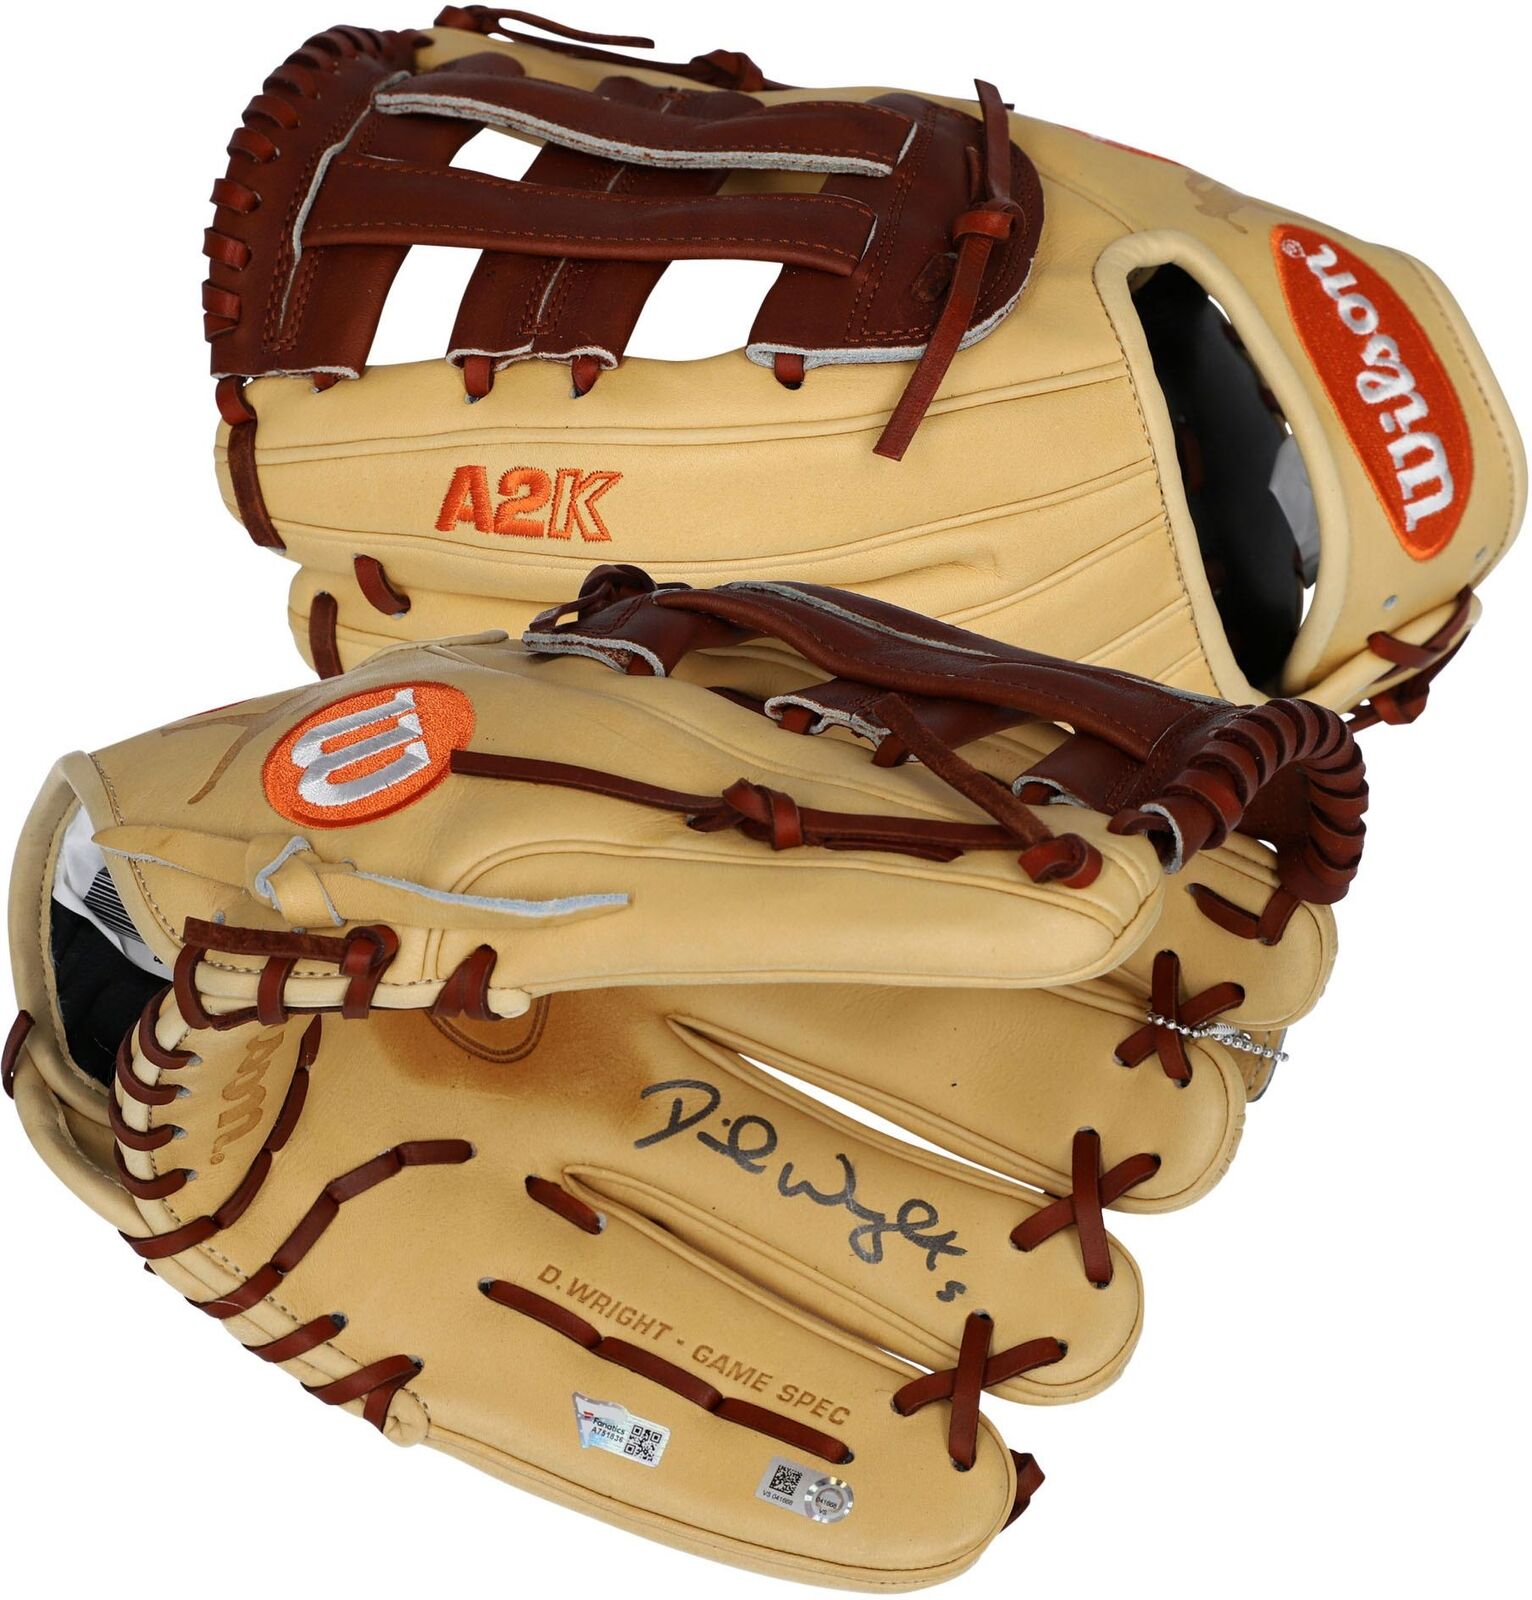 David Wright New York Mets Autographed Wilson Game Model Glove